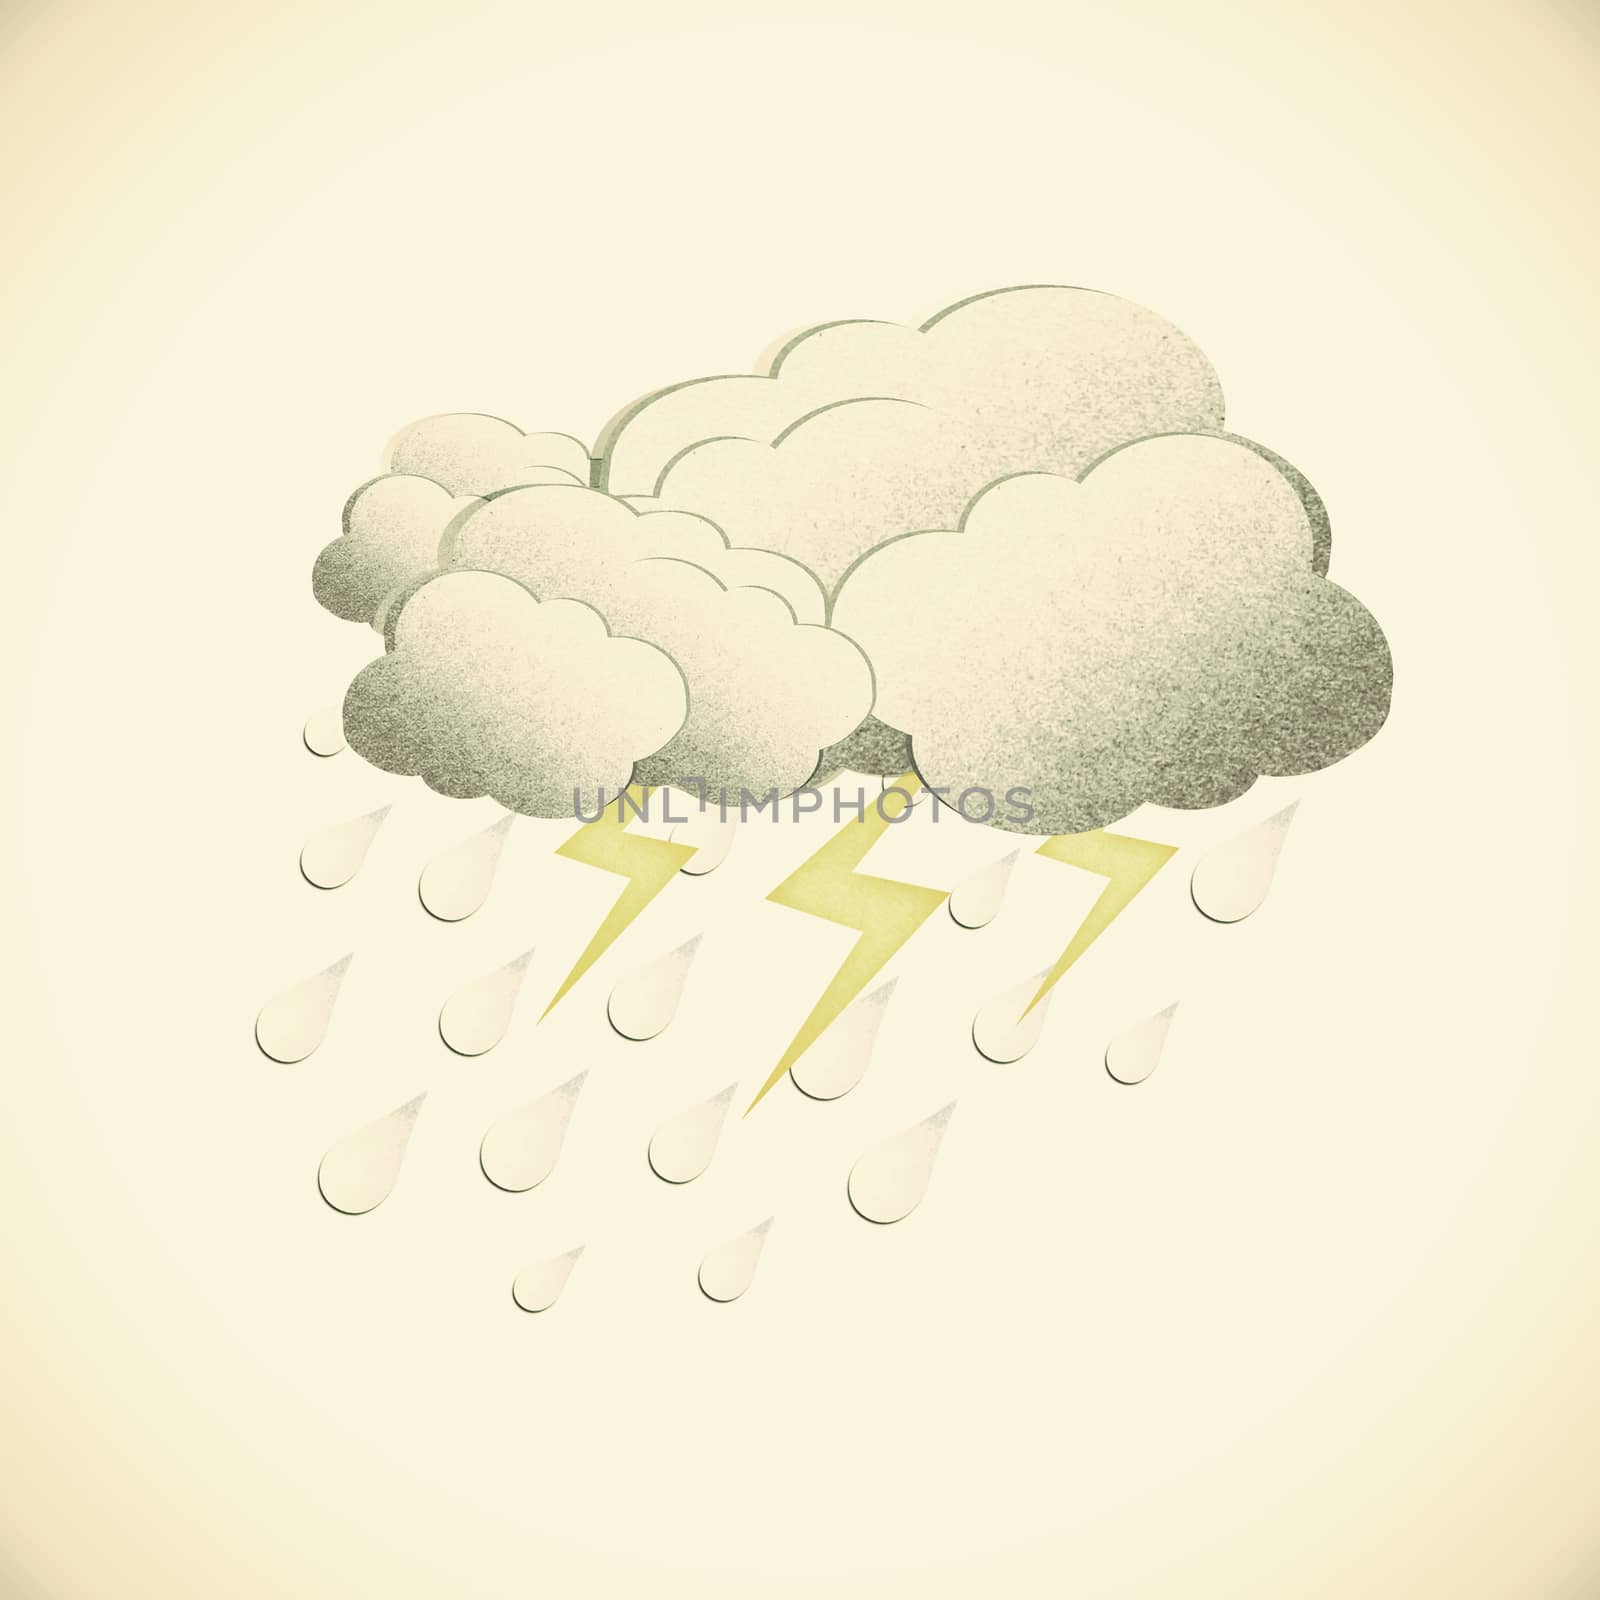  Grunge recycled paper rain and cloud on vintage tone  background